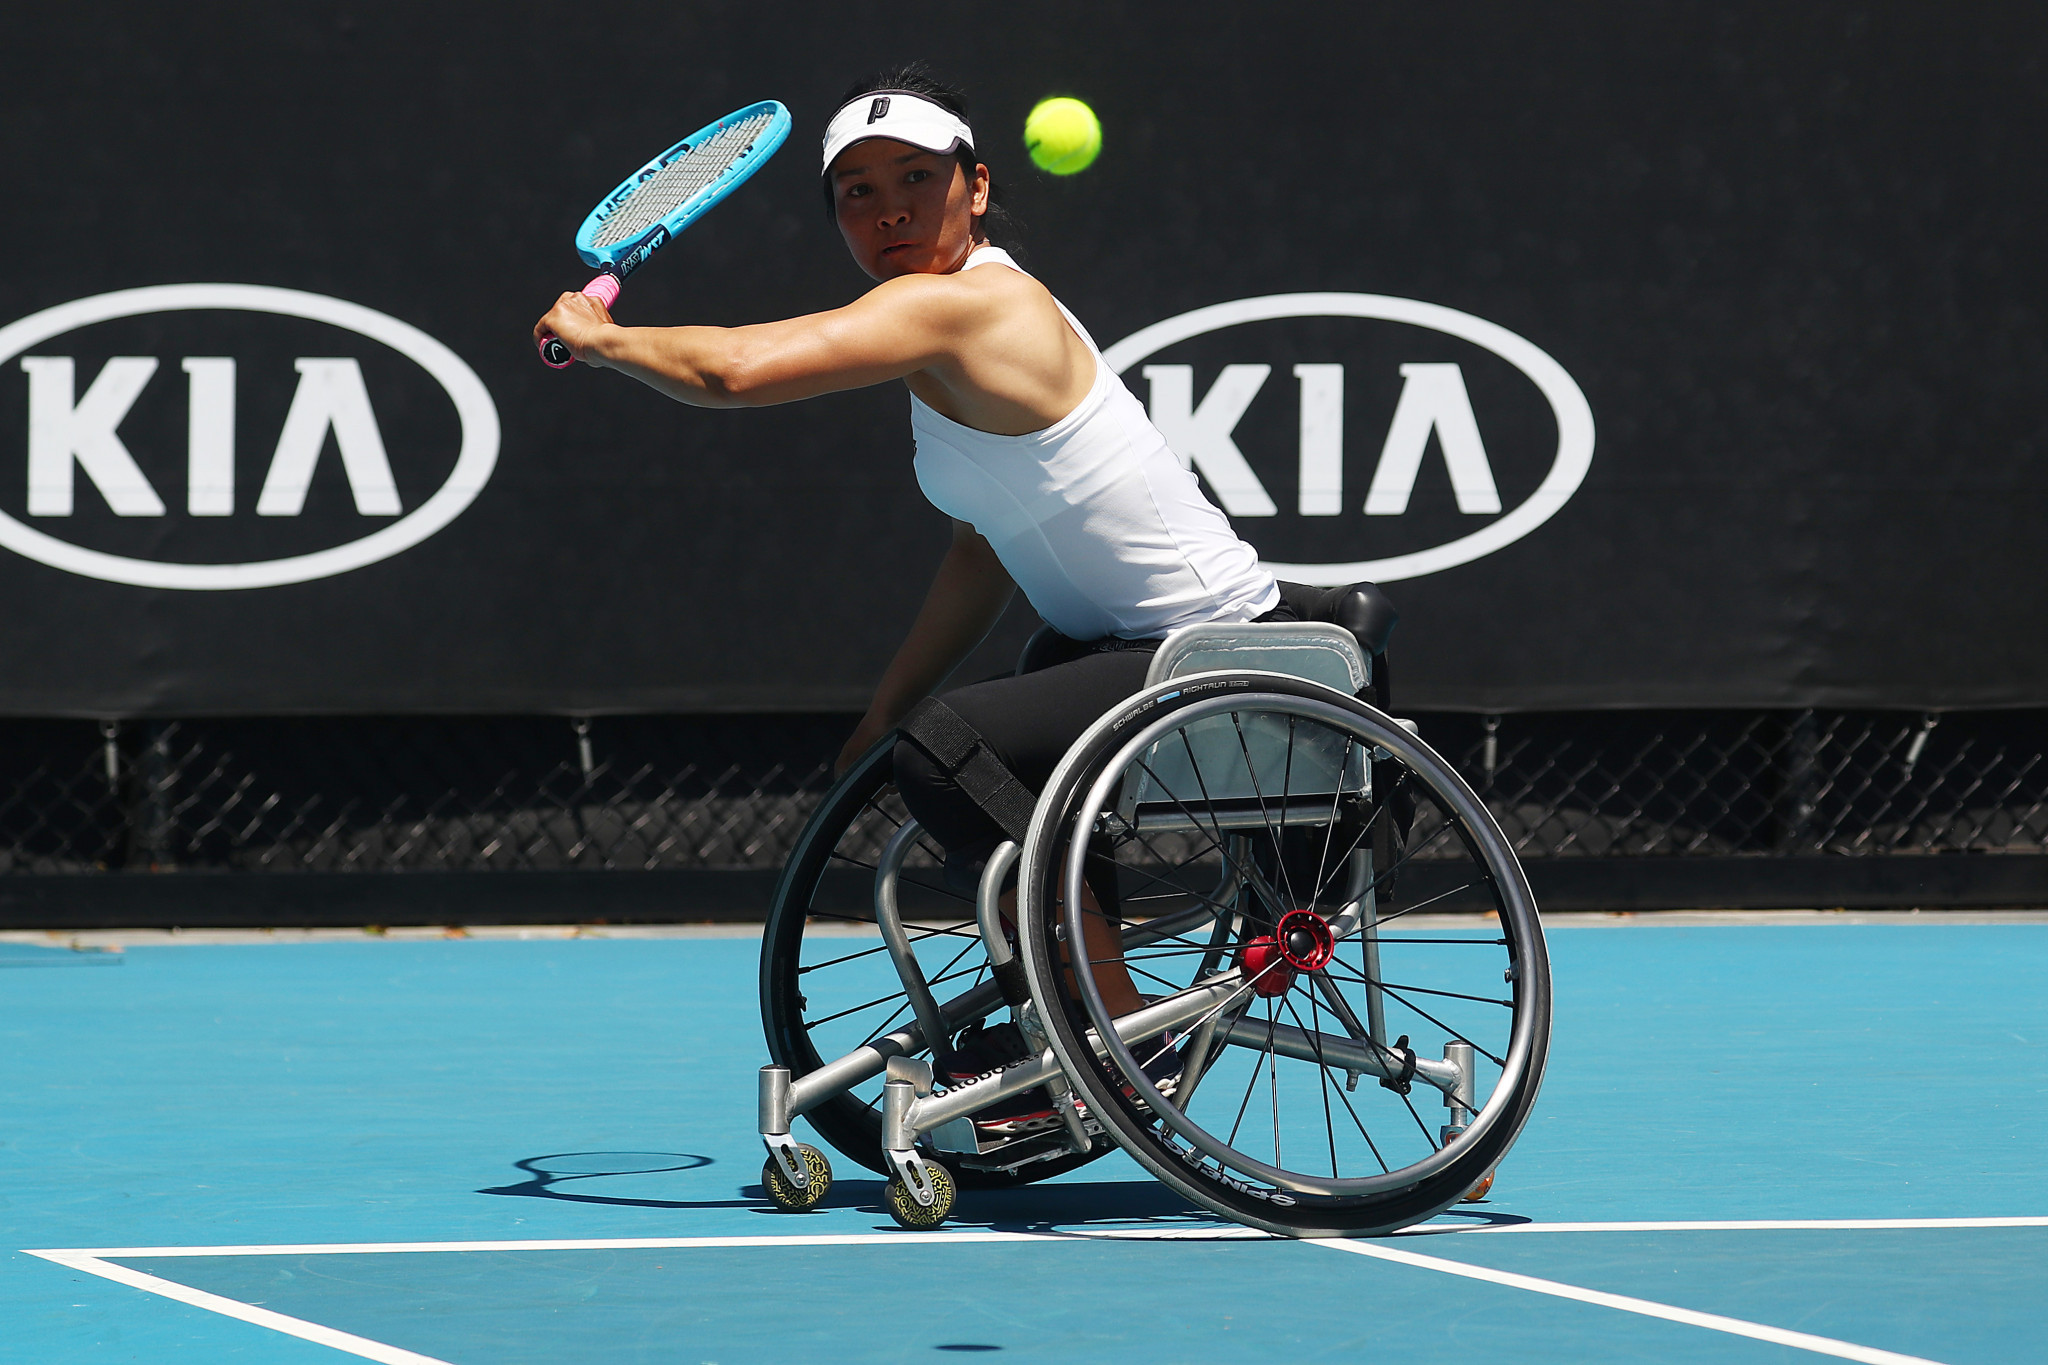 Reigning champions sent packing at Australian Open Wheelchair Tennis Championships